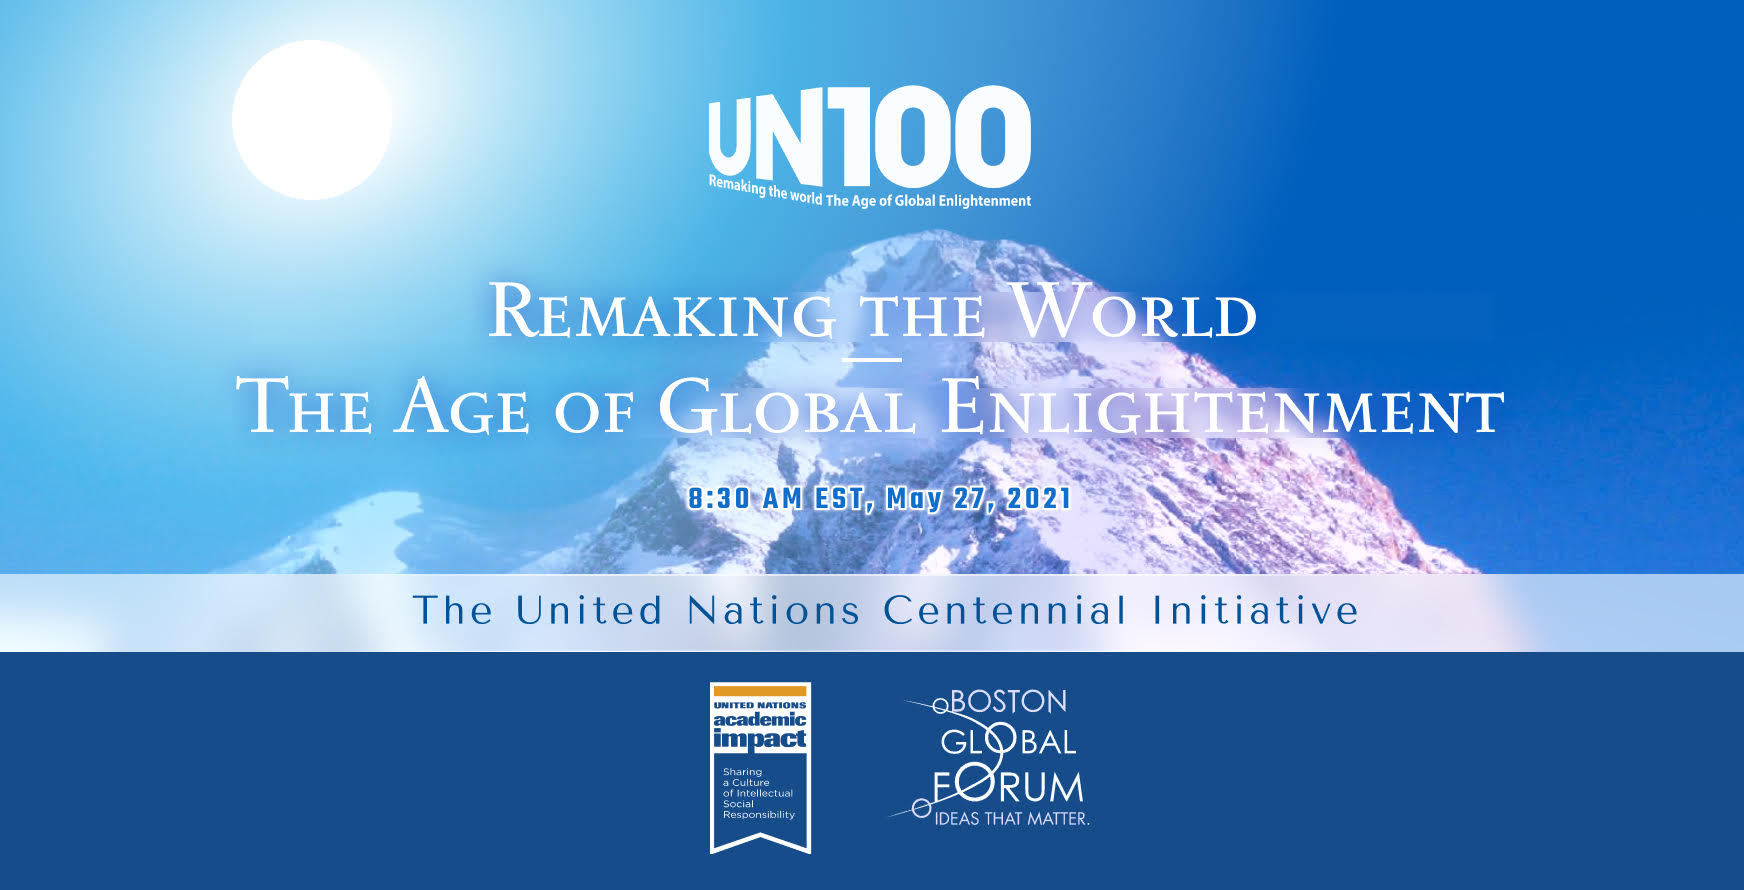 Launching the book “Remaking the world – The Age of Global Enlightenment”